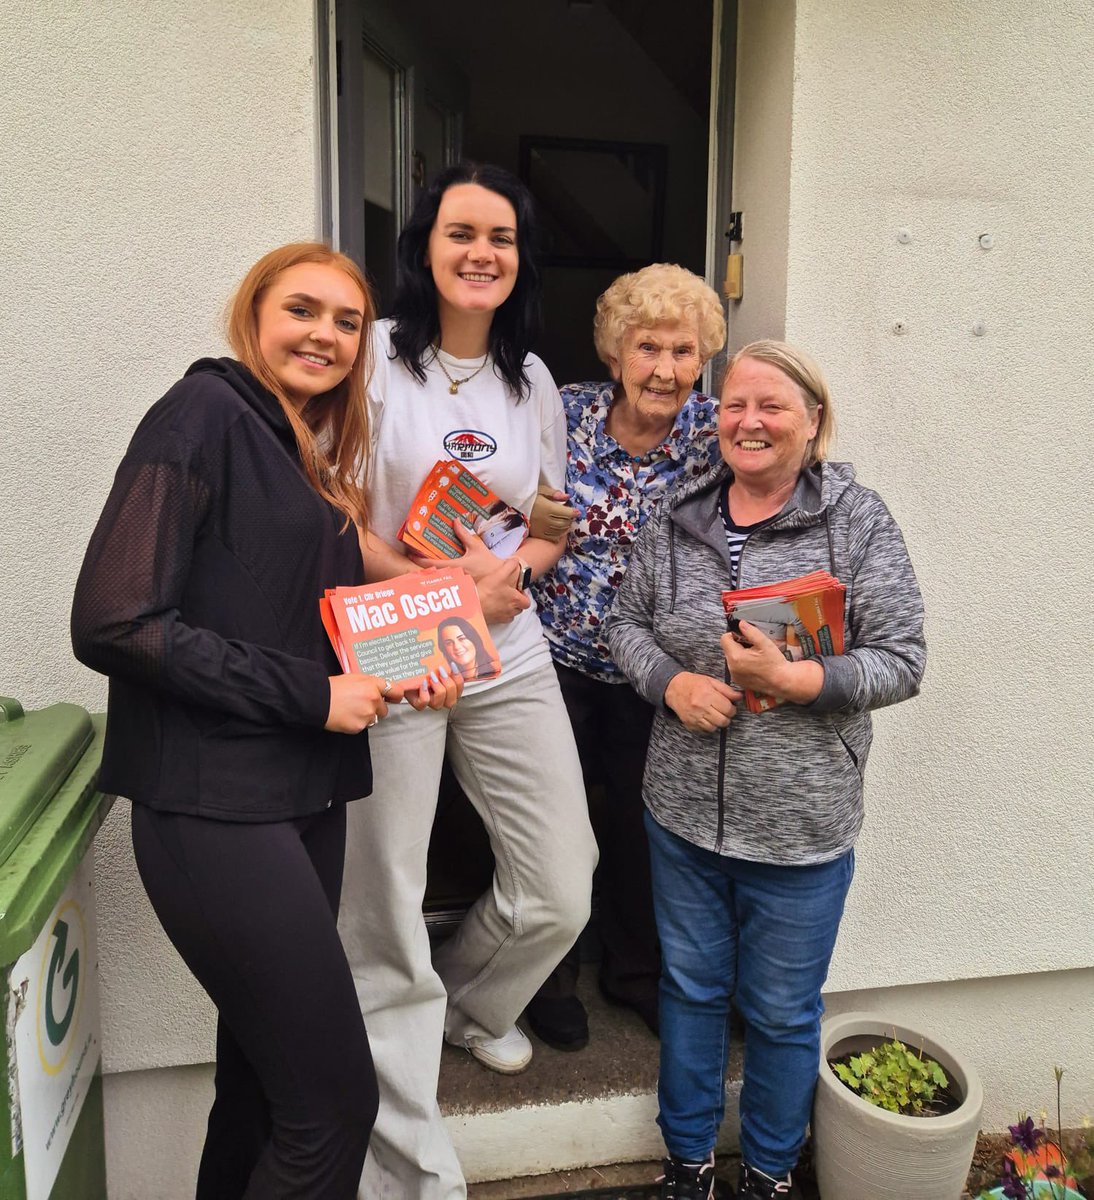 As the grandchild of a generation who were often locked out of voting in local elections by discriminatory laws, I'm so proud to have these women canvassing with me tonight and to catch up with Rose Meleady (97) who has given a lifetime to her community and politics. #MoreMná